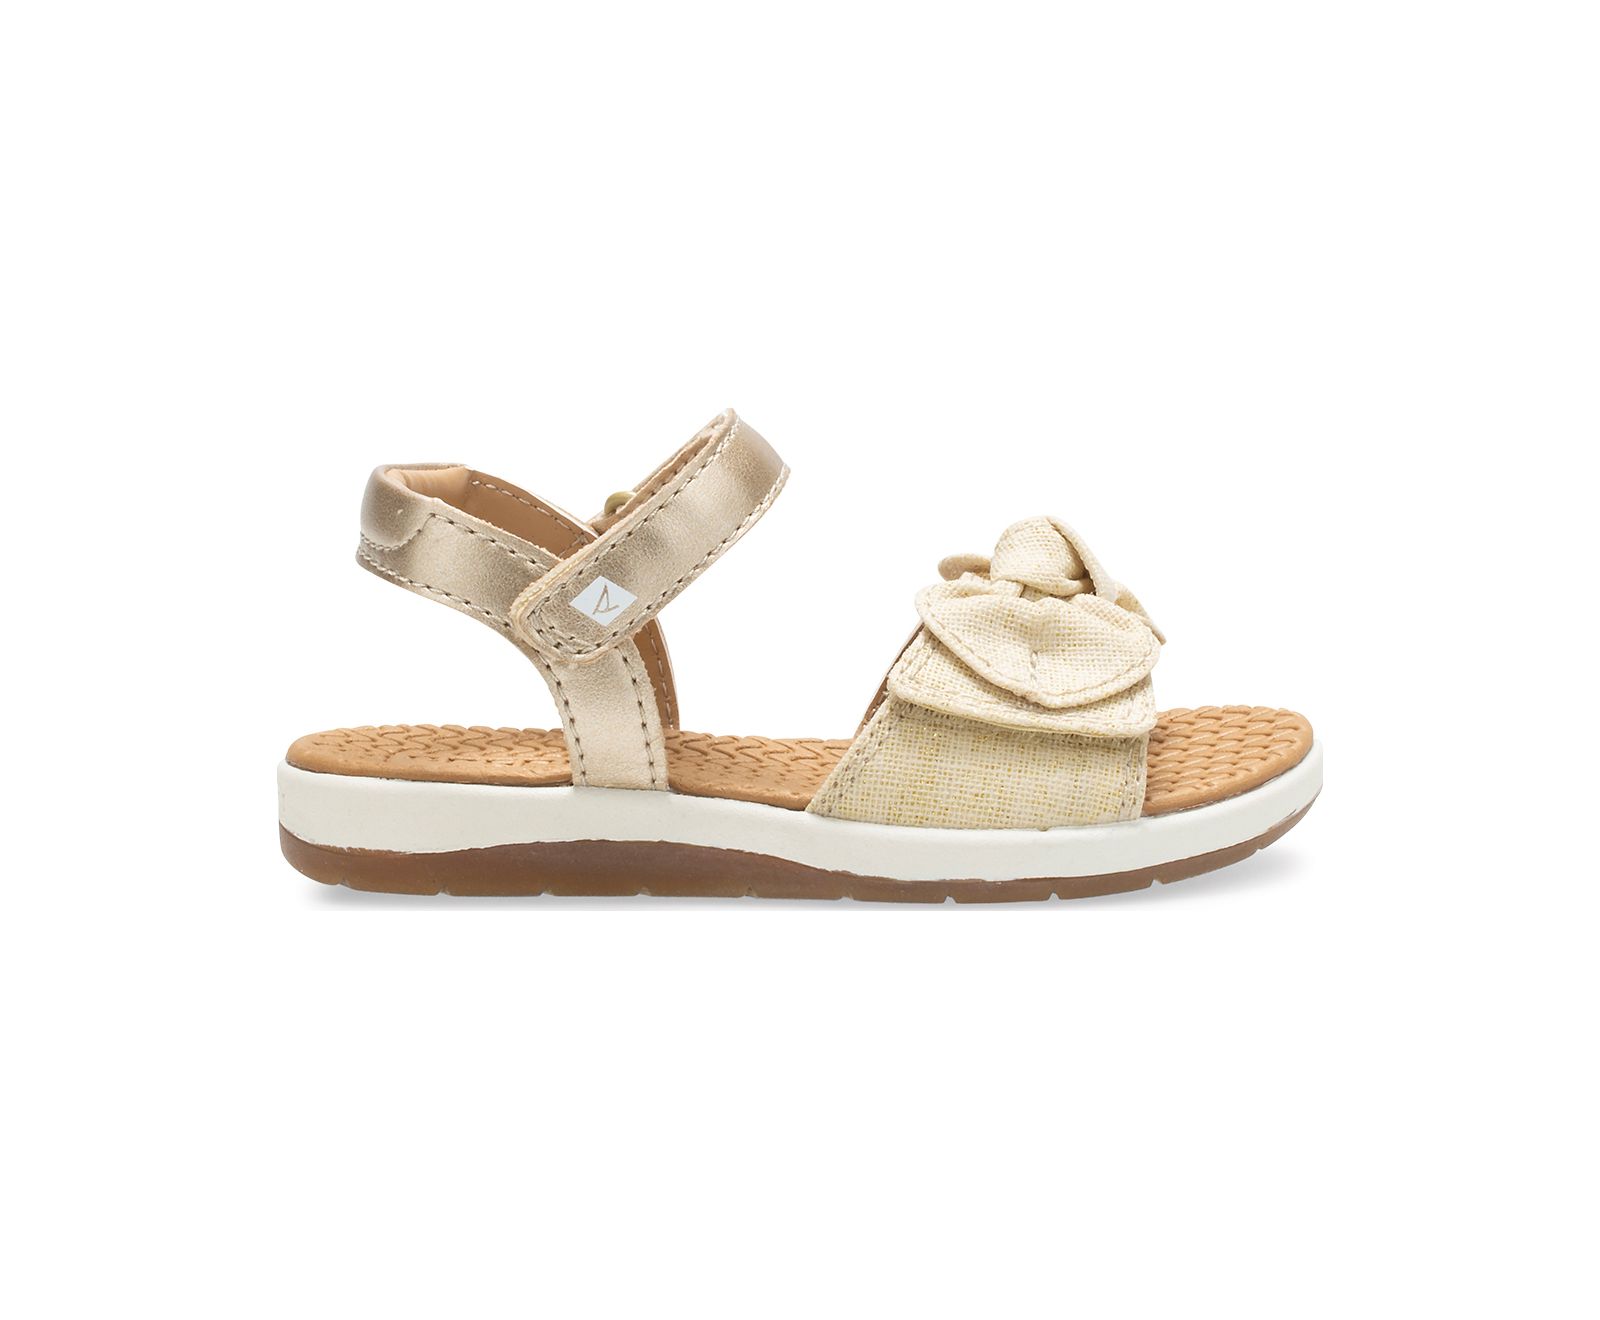 Little Kid's Galley Sandal - Champagne